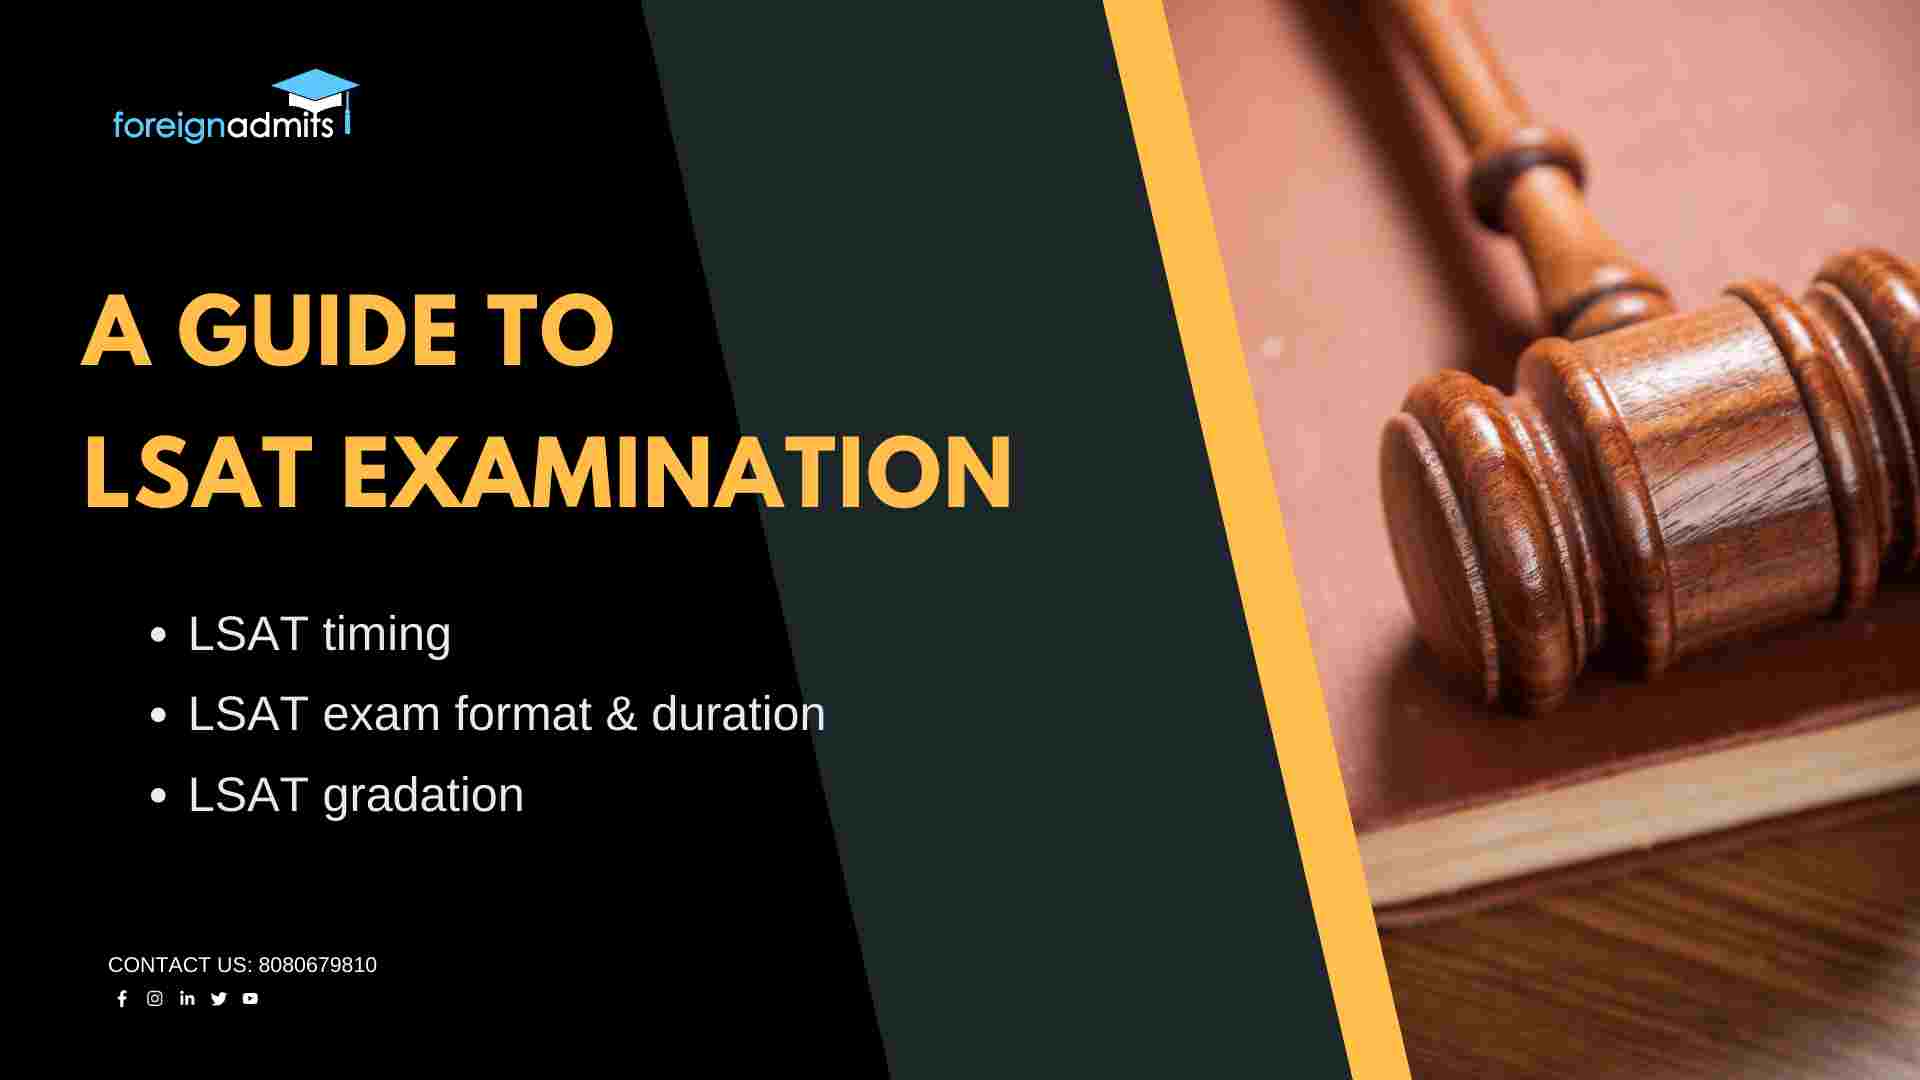 A Guide to LSAT Examination